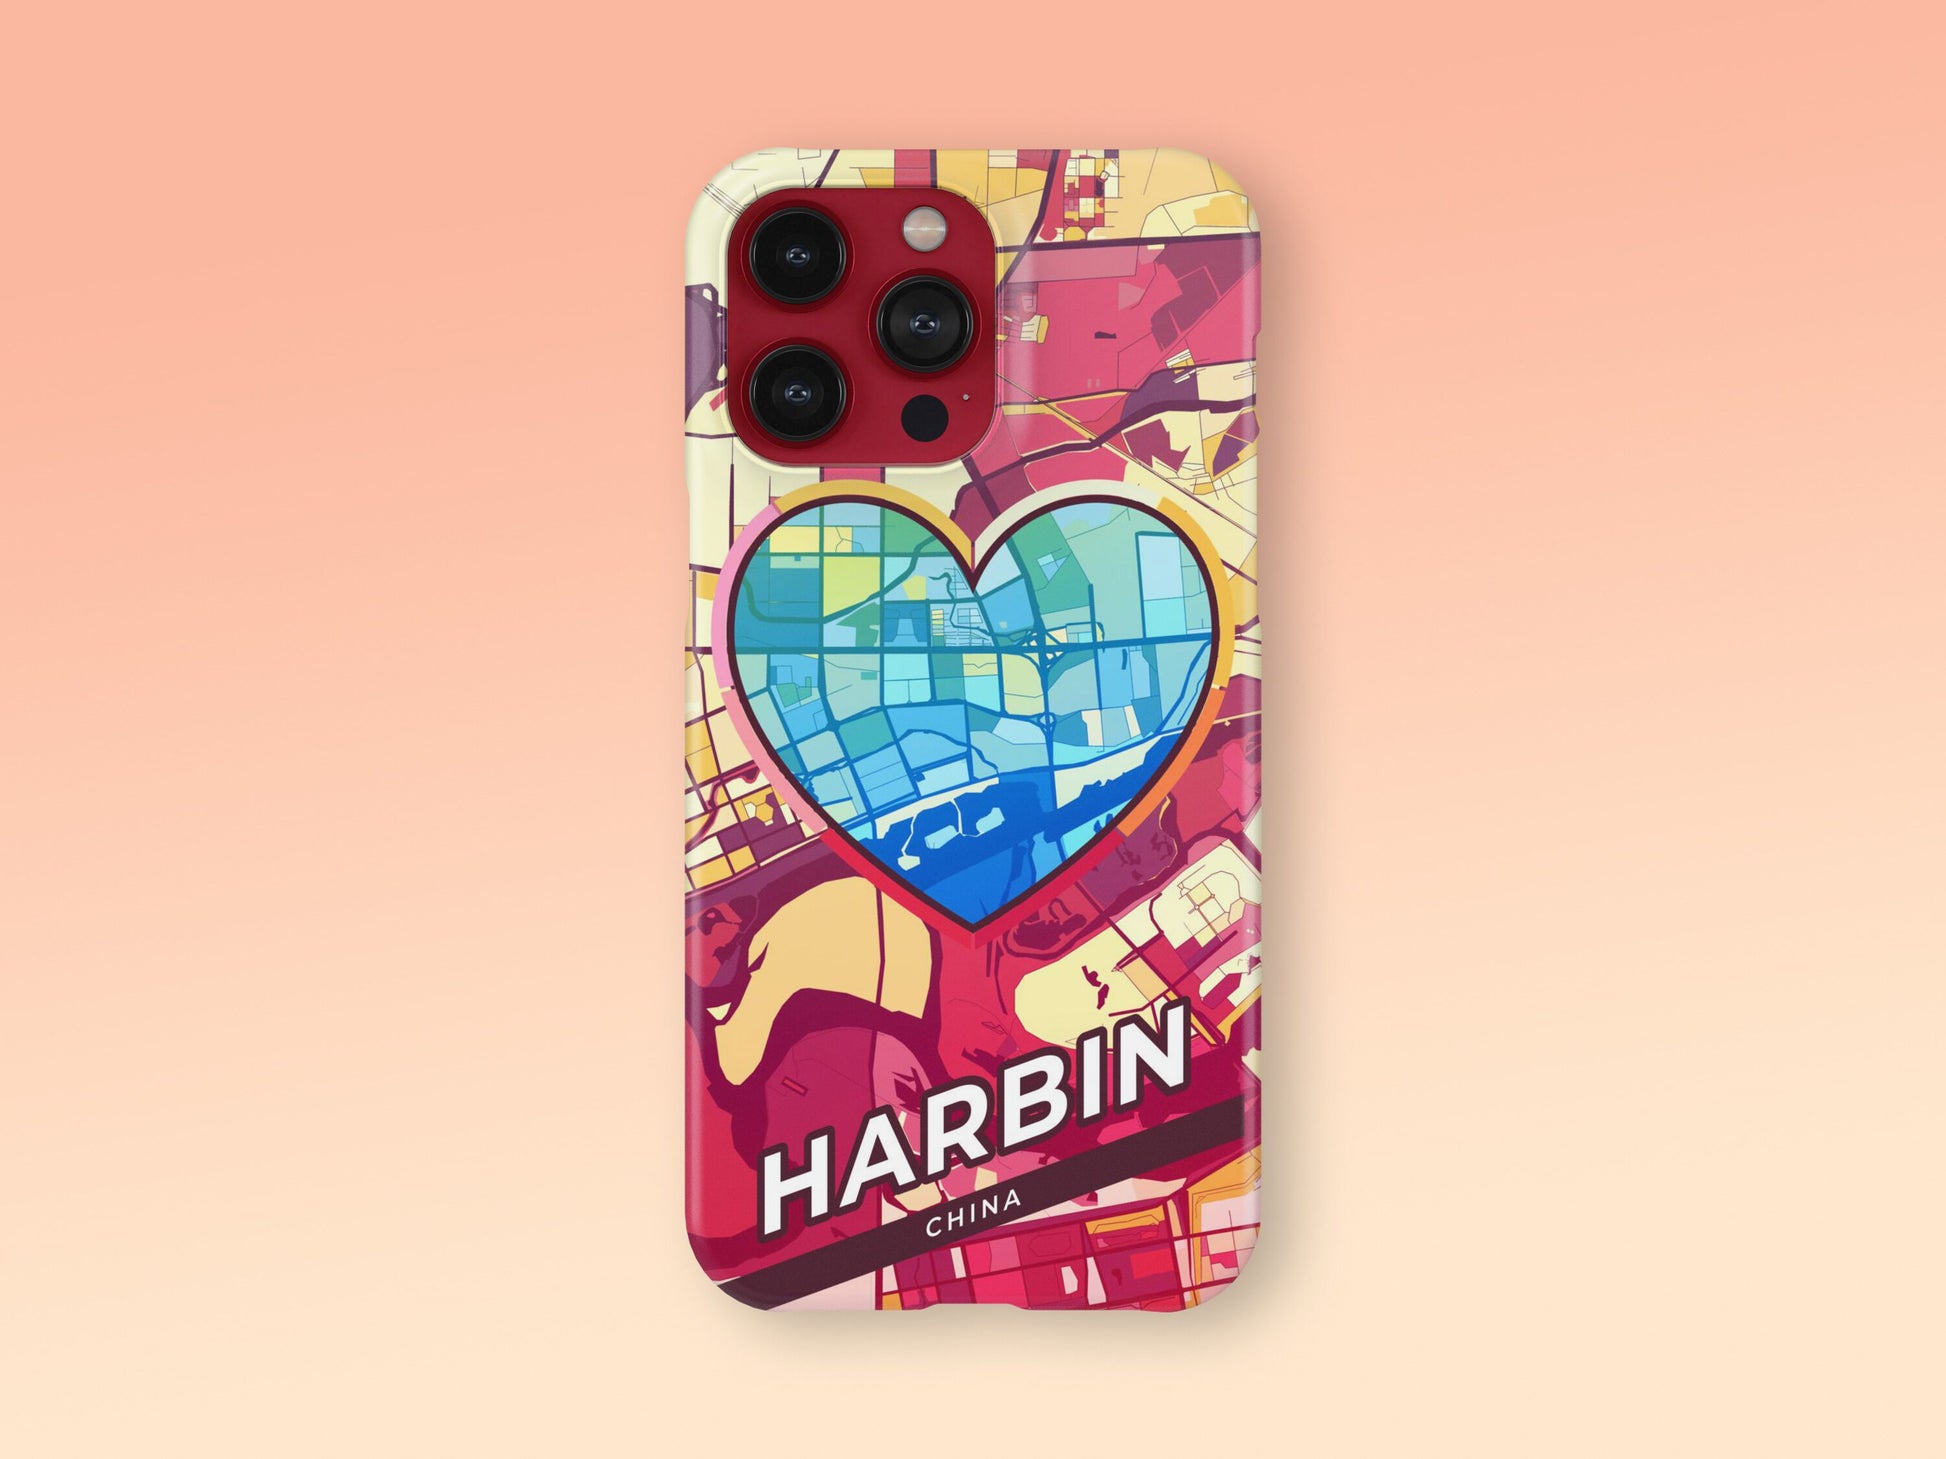 Harbin China slim phone case with colorful icon. Birthday, wedding or housewarming gift. Couple match cases. 2